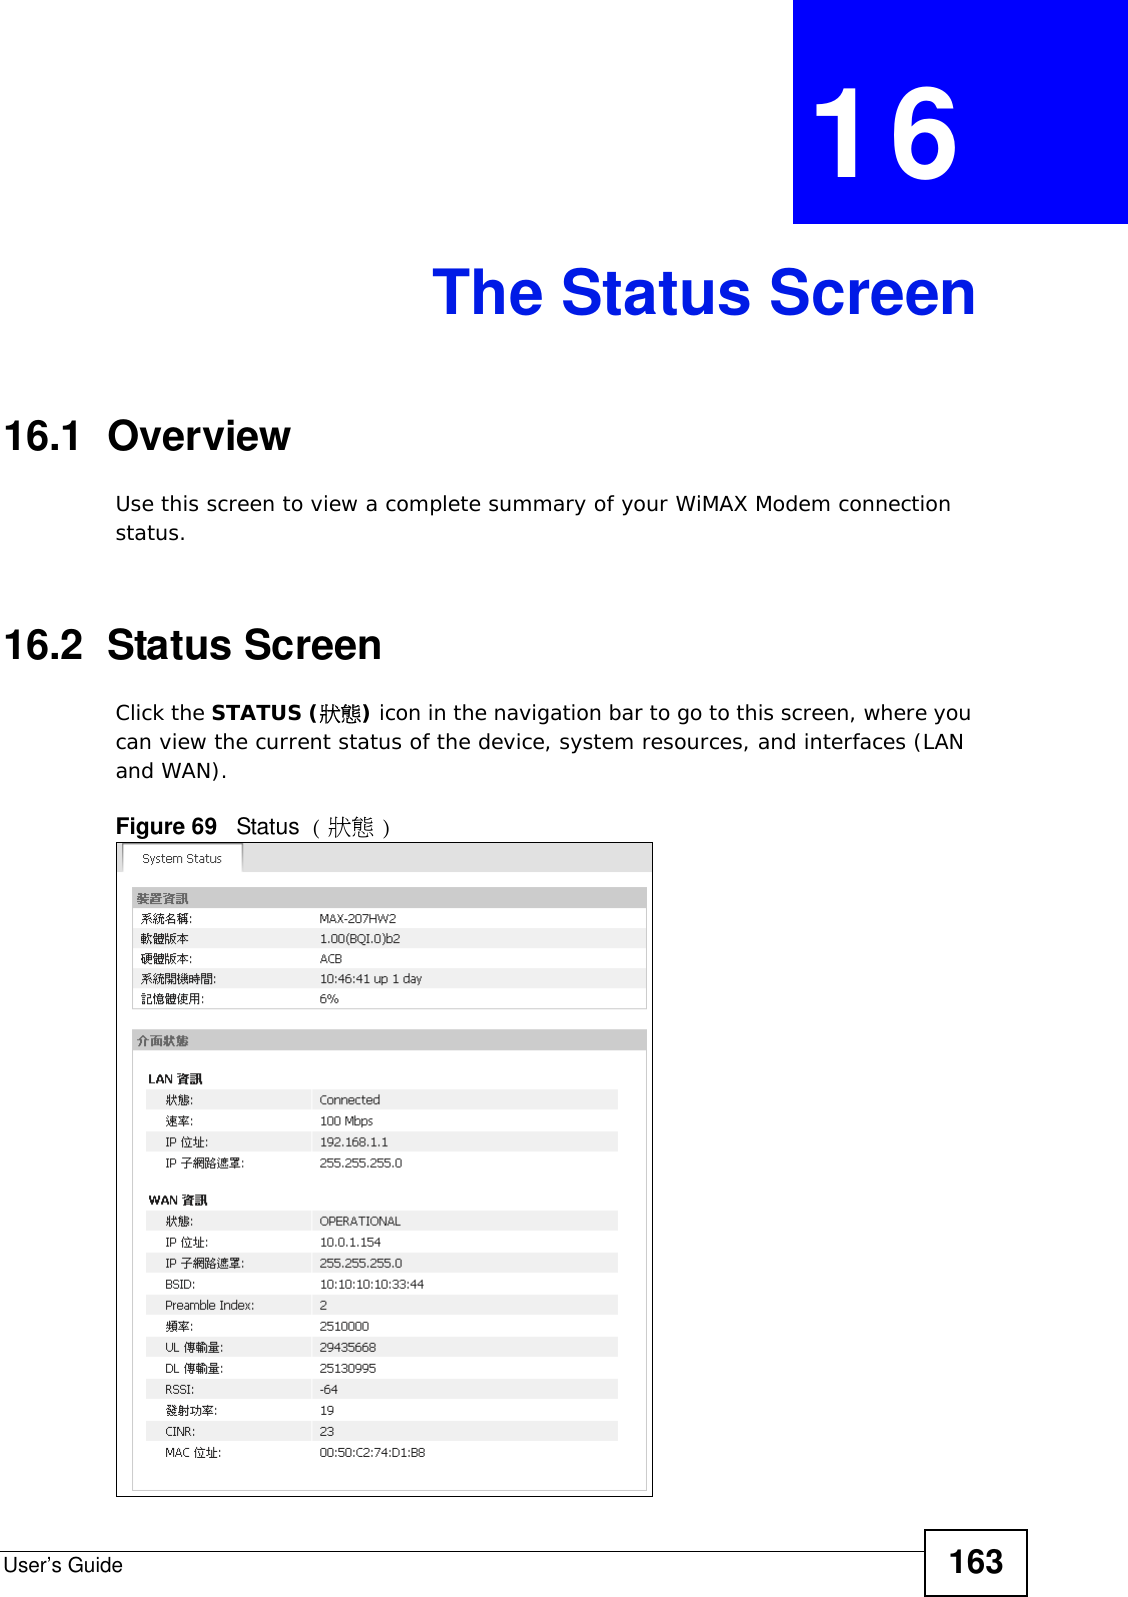 User’s Guide 163CHAPTER  16 The Status Screen16.1  OverviewUse this screen to view a complete summary of your WiMAX Modem connection status.16.2  Status ScreenClick the STATUS (狀態) icon in the navigation bar to go to this screen, where you can view the current status of the device, system resources, and interfaces (LAN and WAN). Figure 69   Status ( 狀態 )